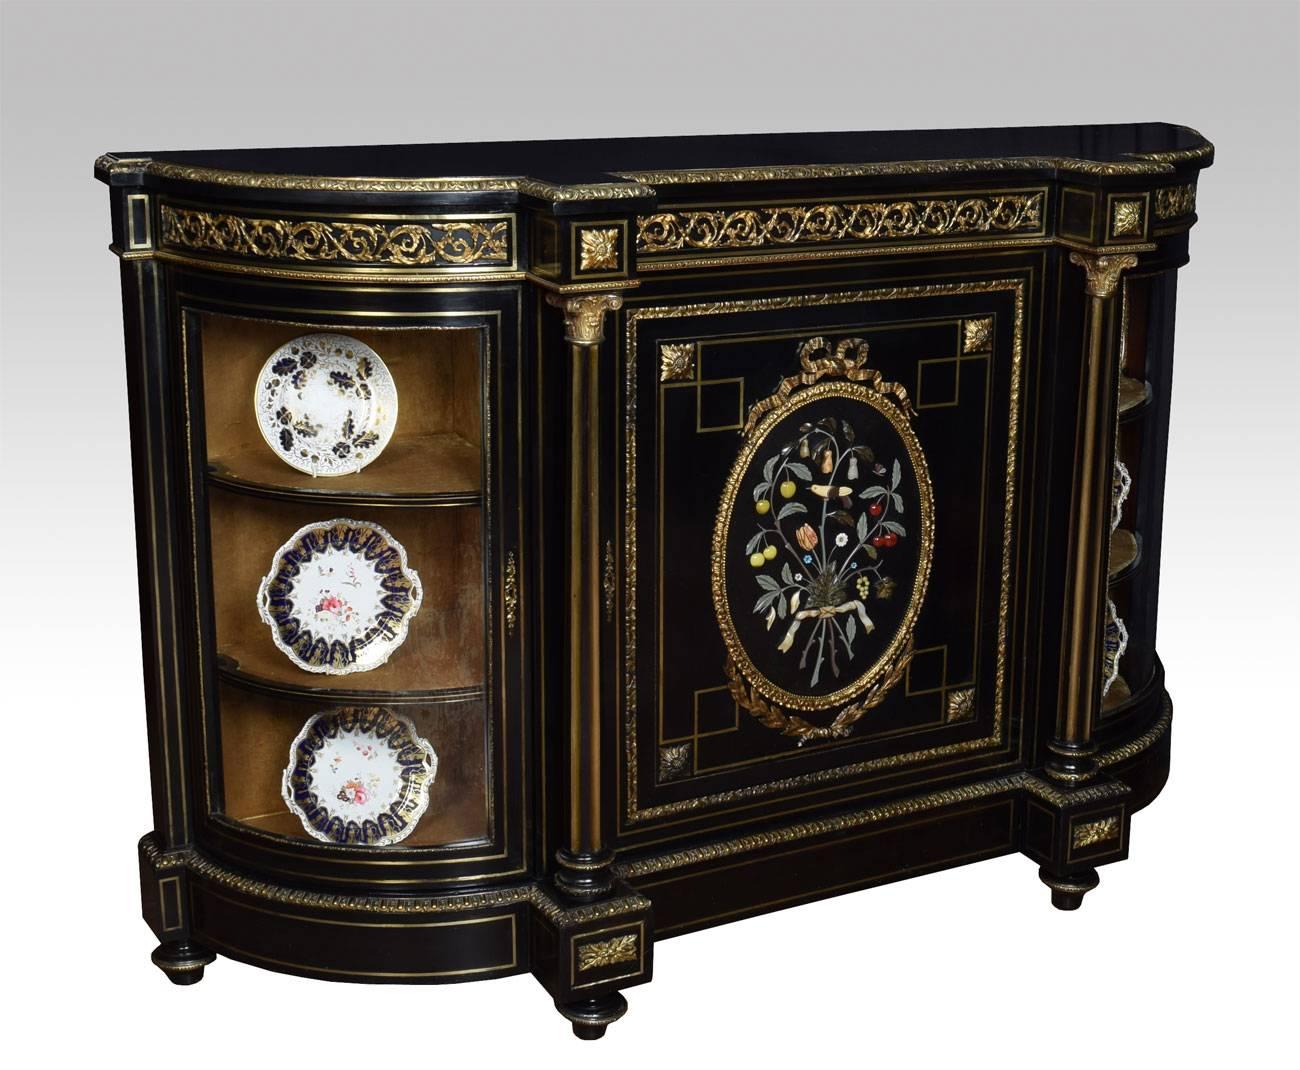 Napoleon III gilt bronze and Pietra Dura mounted ebonized cabinet / credenza, the large ebony top to the gilt metal leaf cast gilt bronze scrolling frieze having Corinthian columns flanking a central door centred with an Pietra Dura oval panel